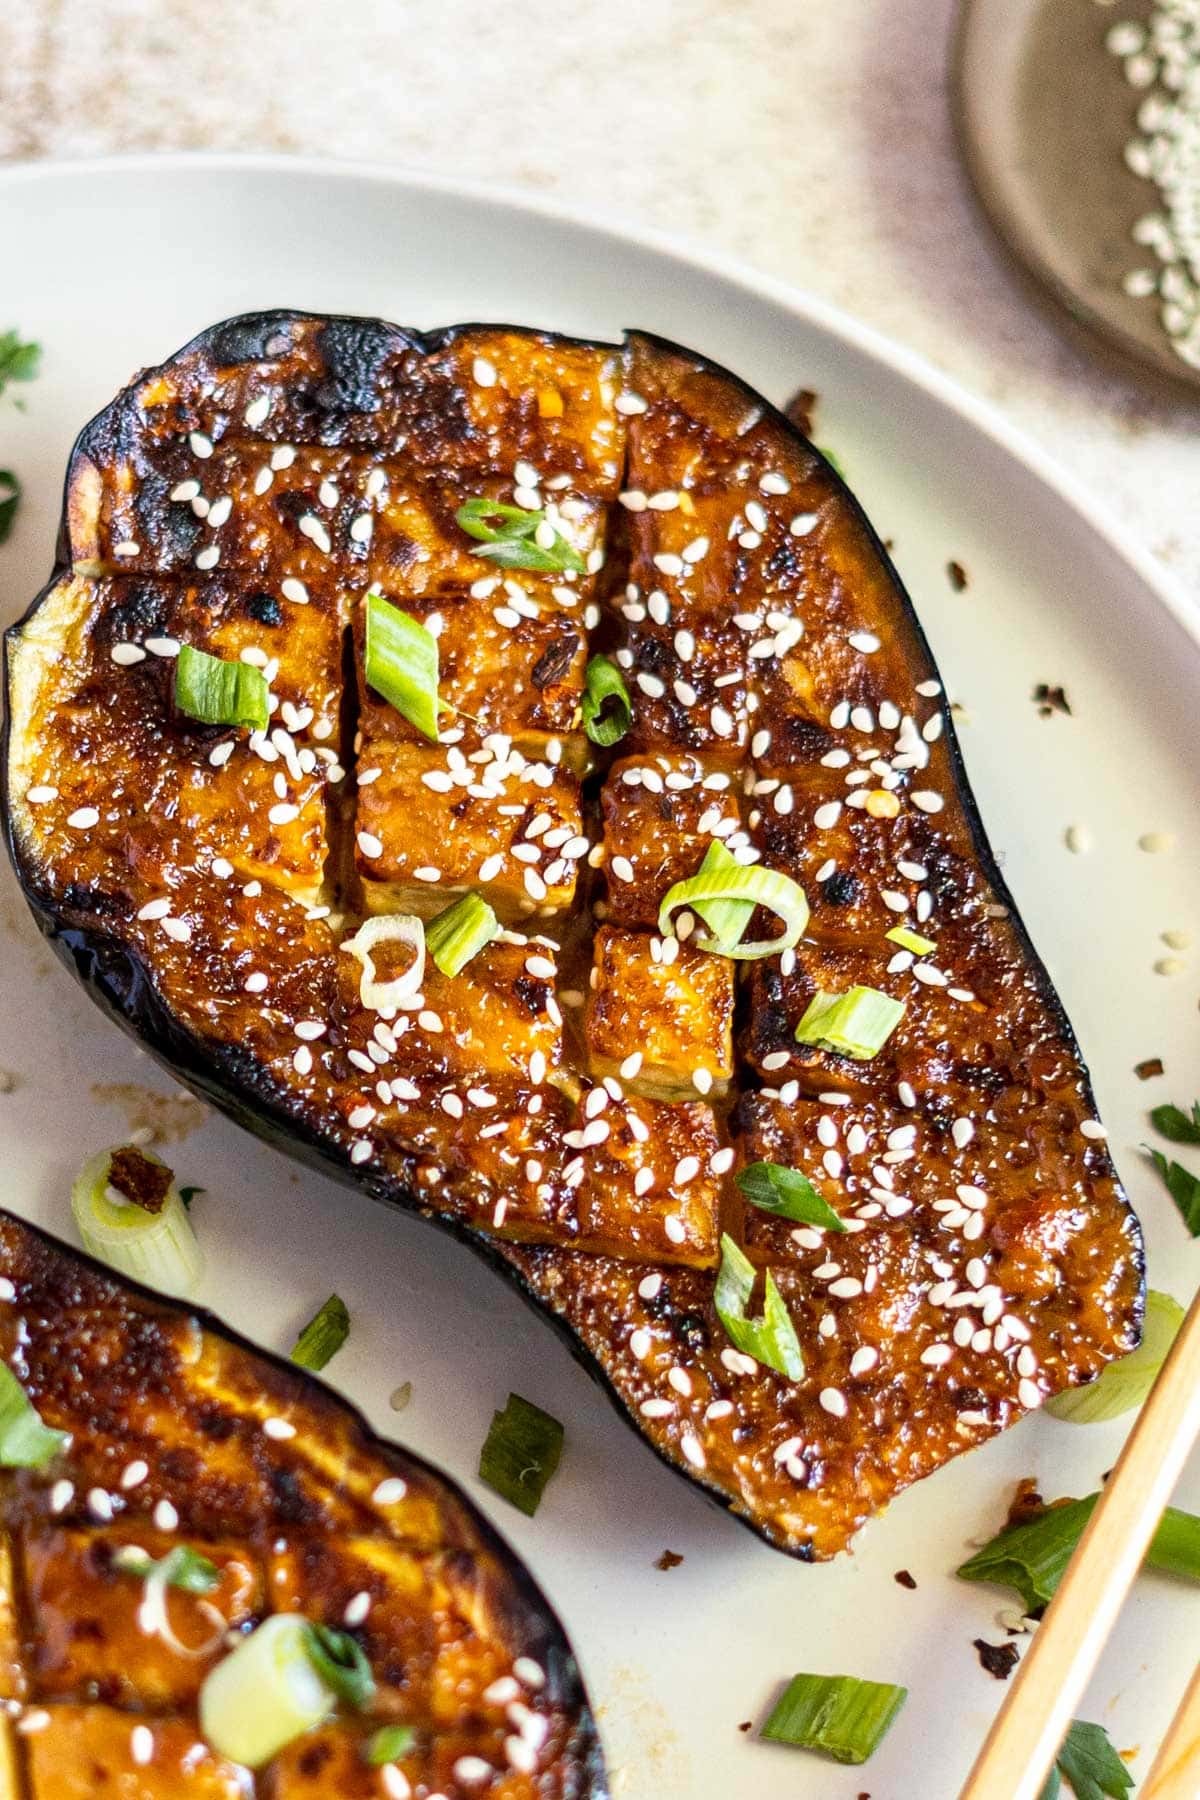 Crosshatched baked eggplant with sesame.